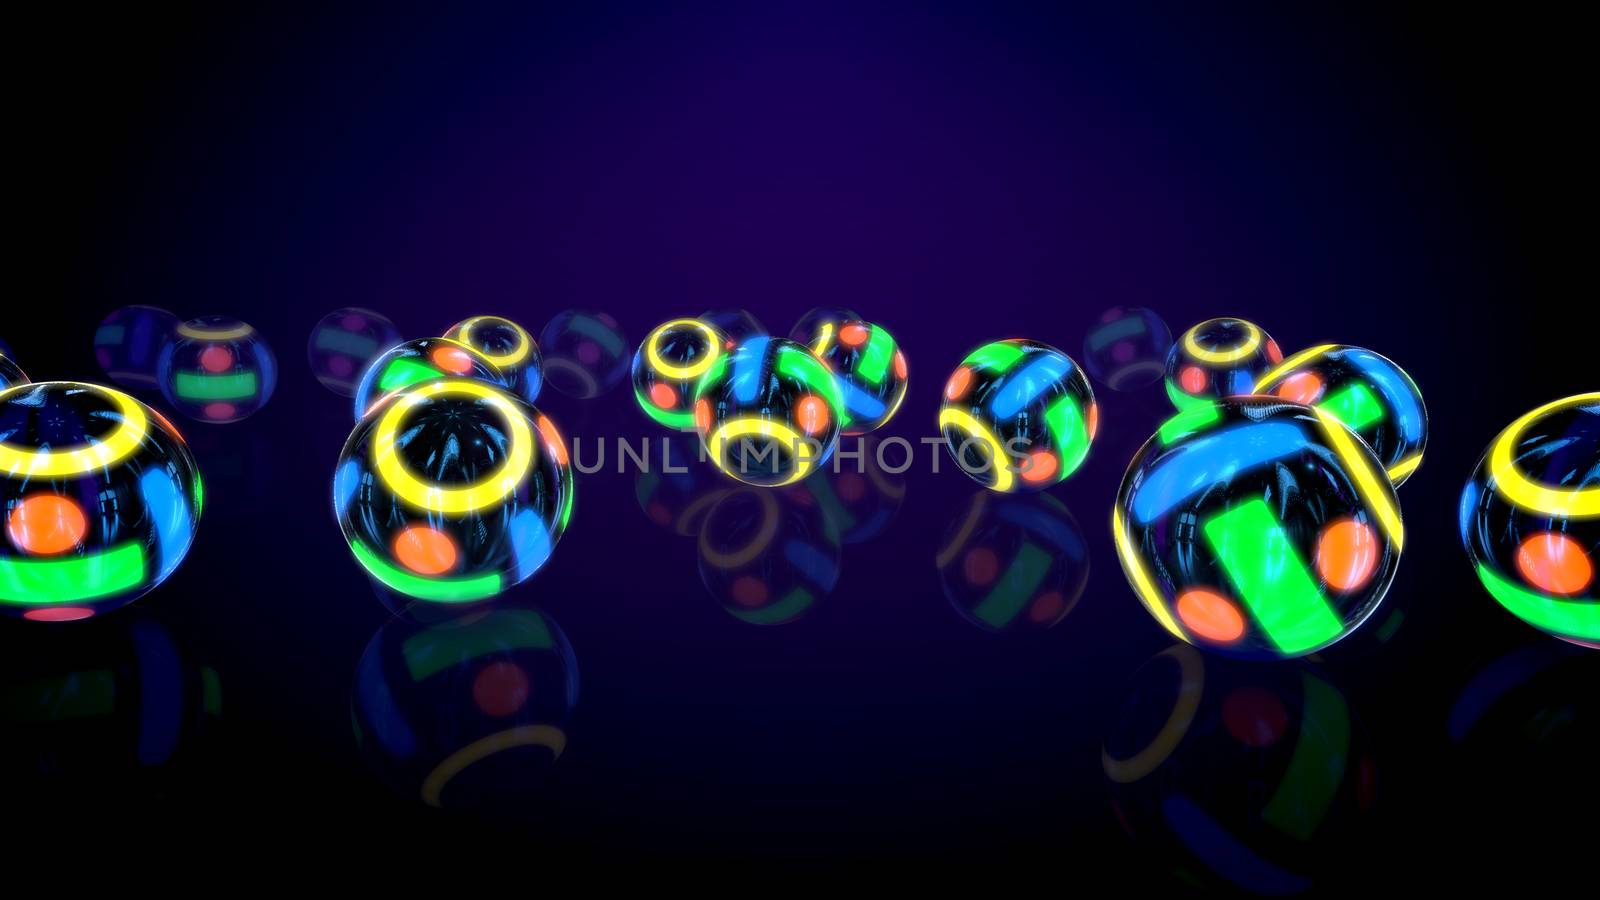 Festive 3d illutration of a group of neon looking colorful balls rolling on a flat surface in several lines in the black background. They create the spirit of innovation, fun and optimism.